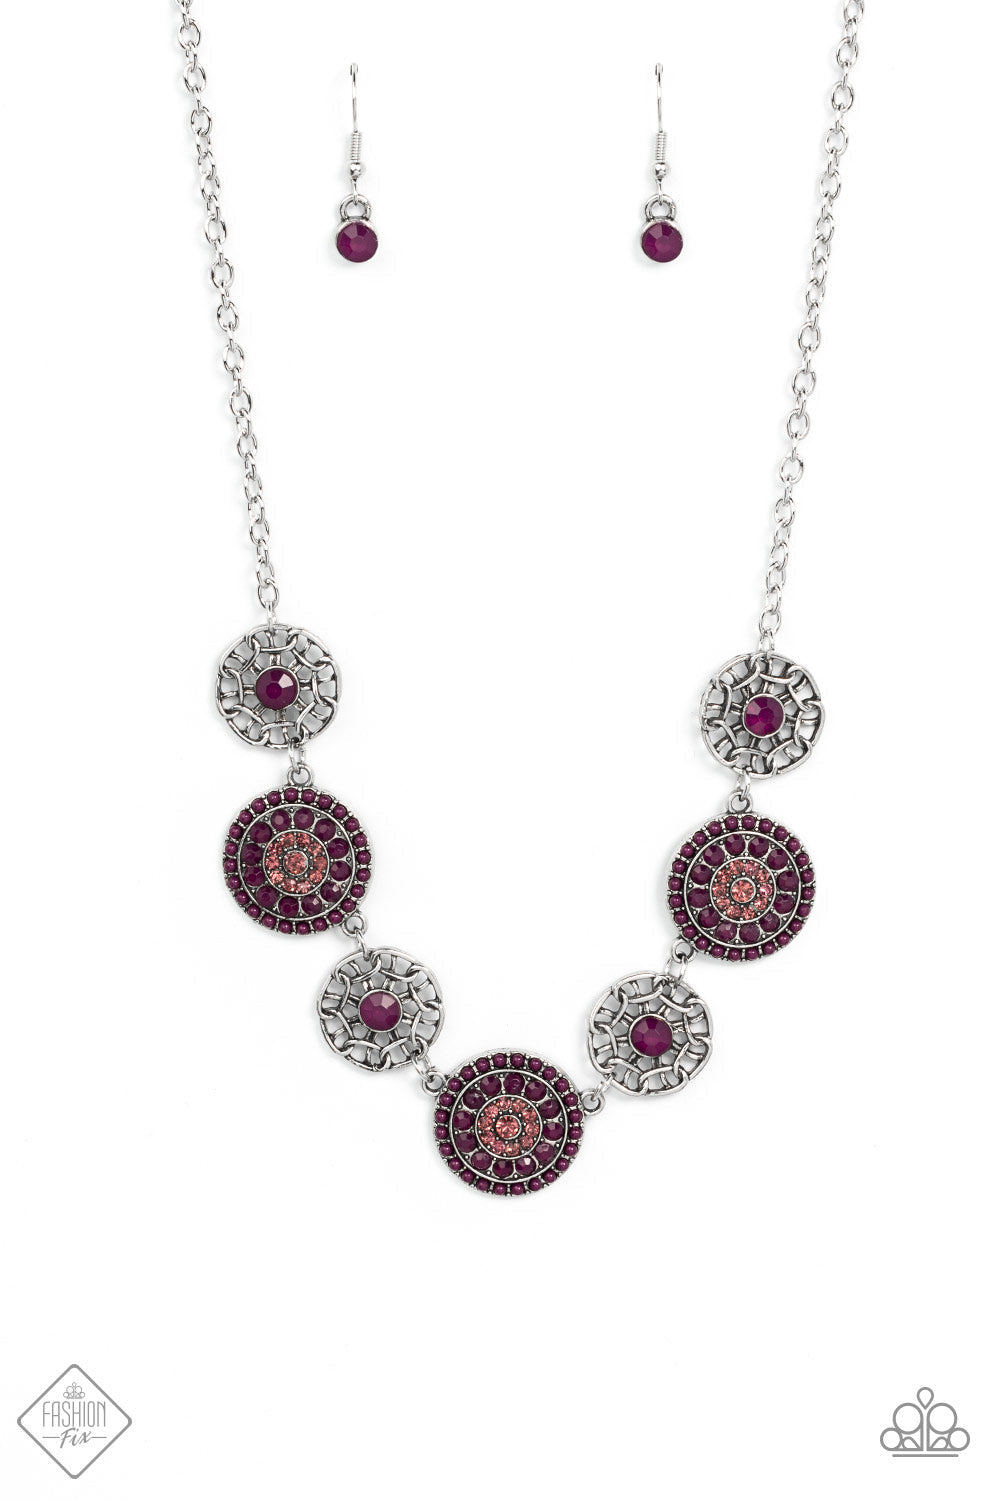 Farmers Market Fashionista - Purple - Plum - Amethyst Necklace and Earrings - Paparazzi Accessories - 
Bursts of faceted plum beads and sparkling light amethyst rhinestones radiate from the centers of antiqued silver frames, while smaller airy frames are dotted with plum centers. The whimsical designs alternate around the collar making a dazzling display. Features an adjustable clasp closure.
